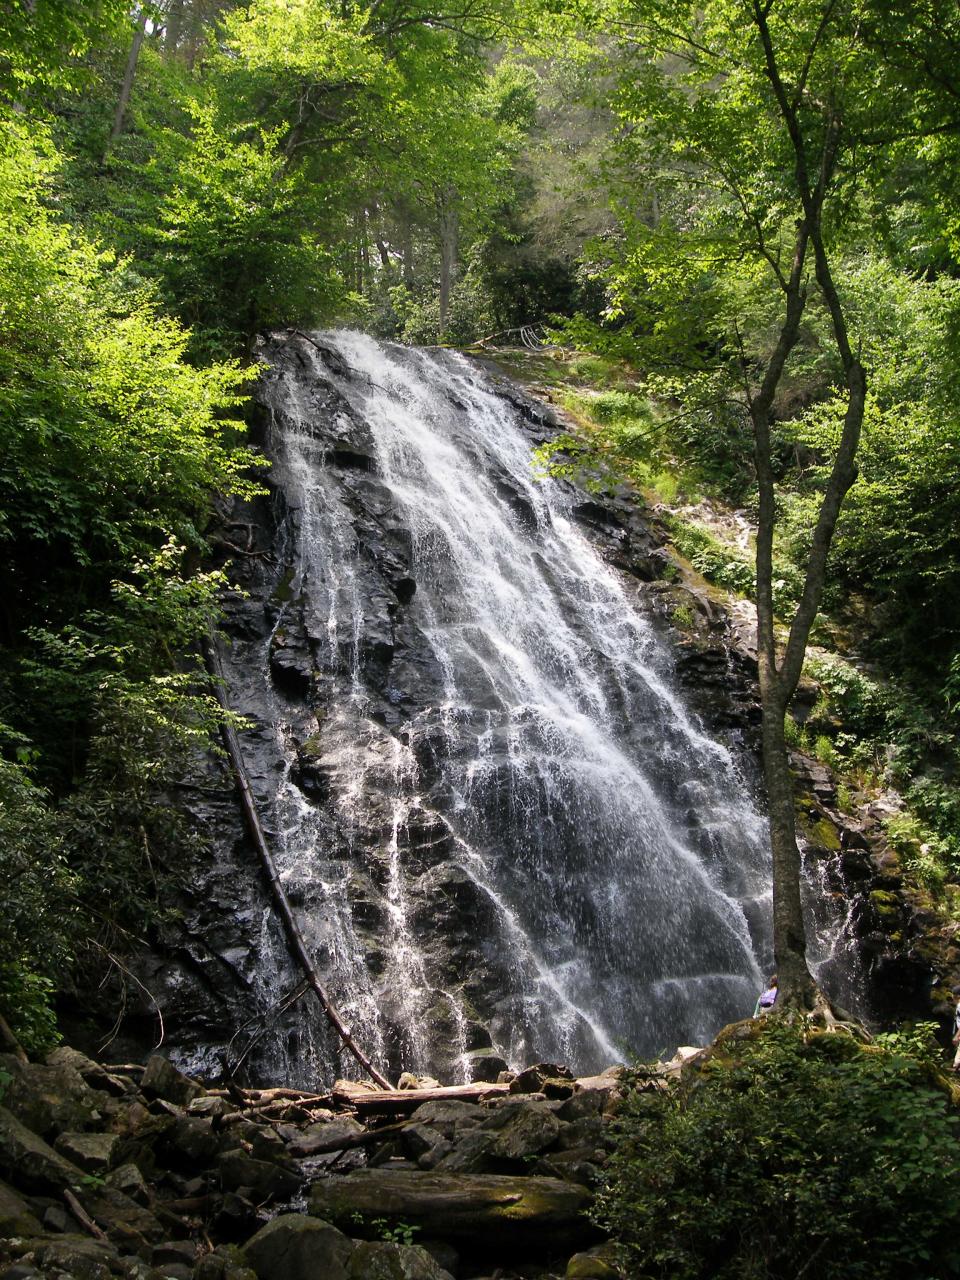 Crabtree Falls is a popular hiking destination off the Blue Ridge Parkway a little more than an hour’s drive north of Asheville.